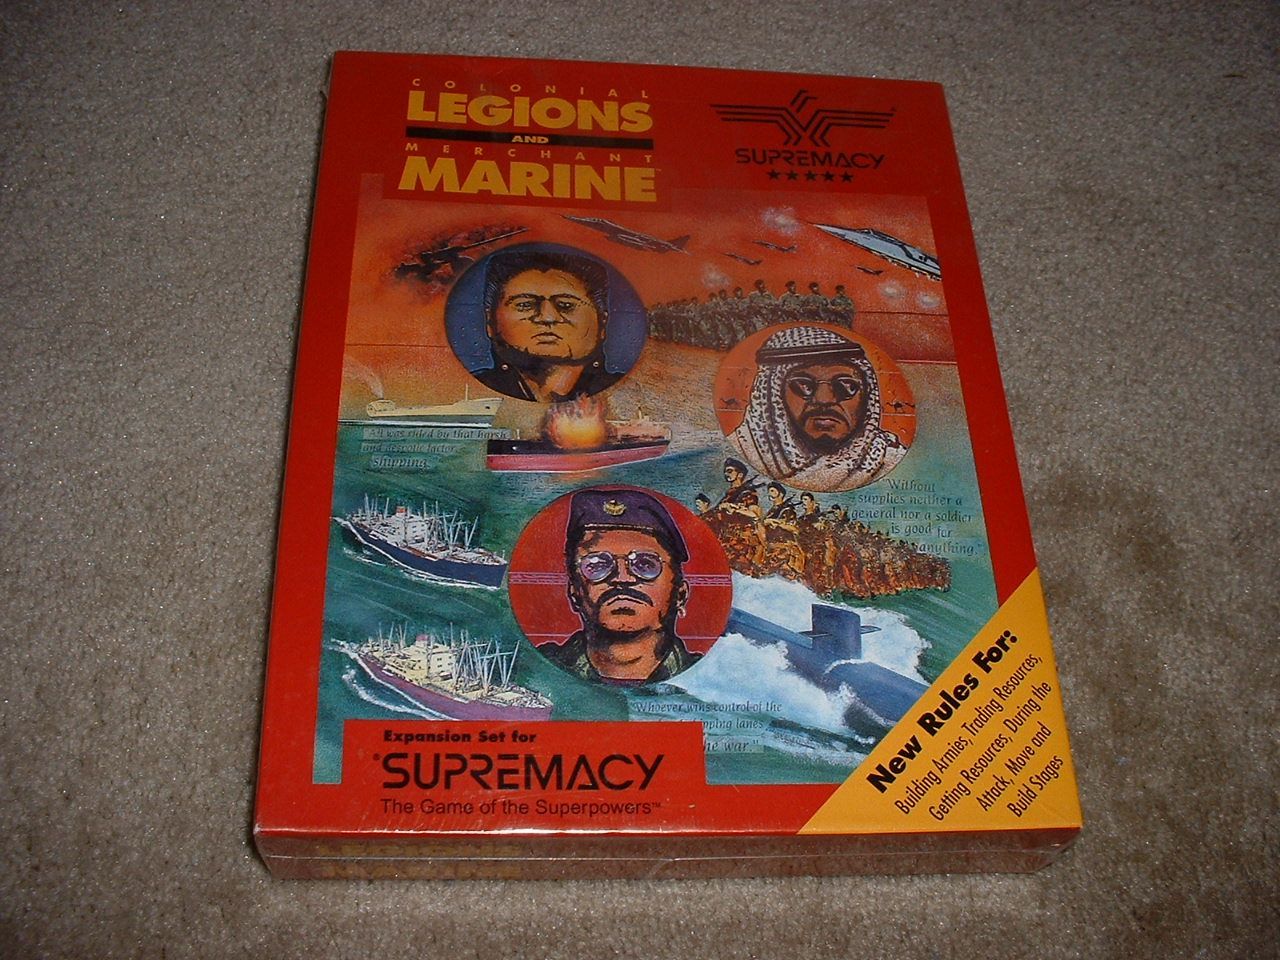 Supremacy: Colonial Legions and Merchant Marine